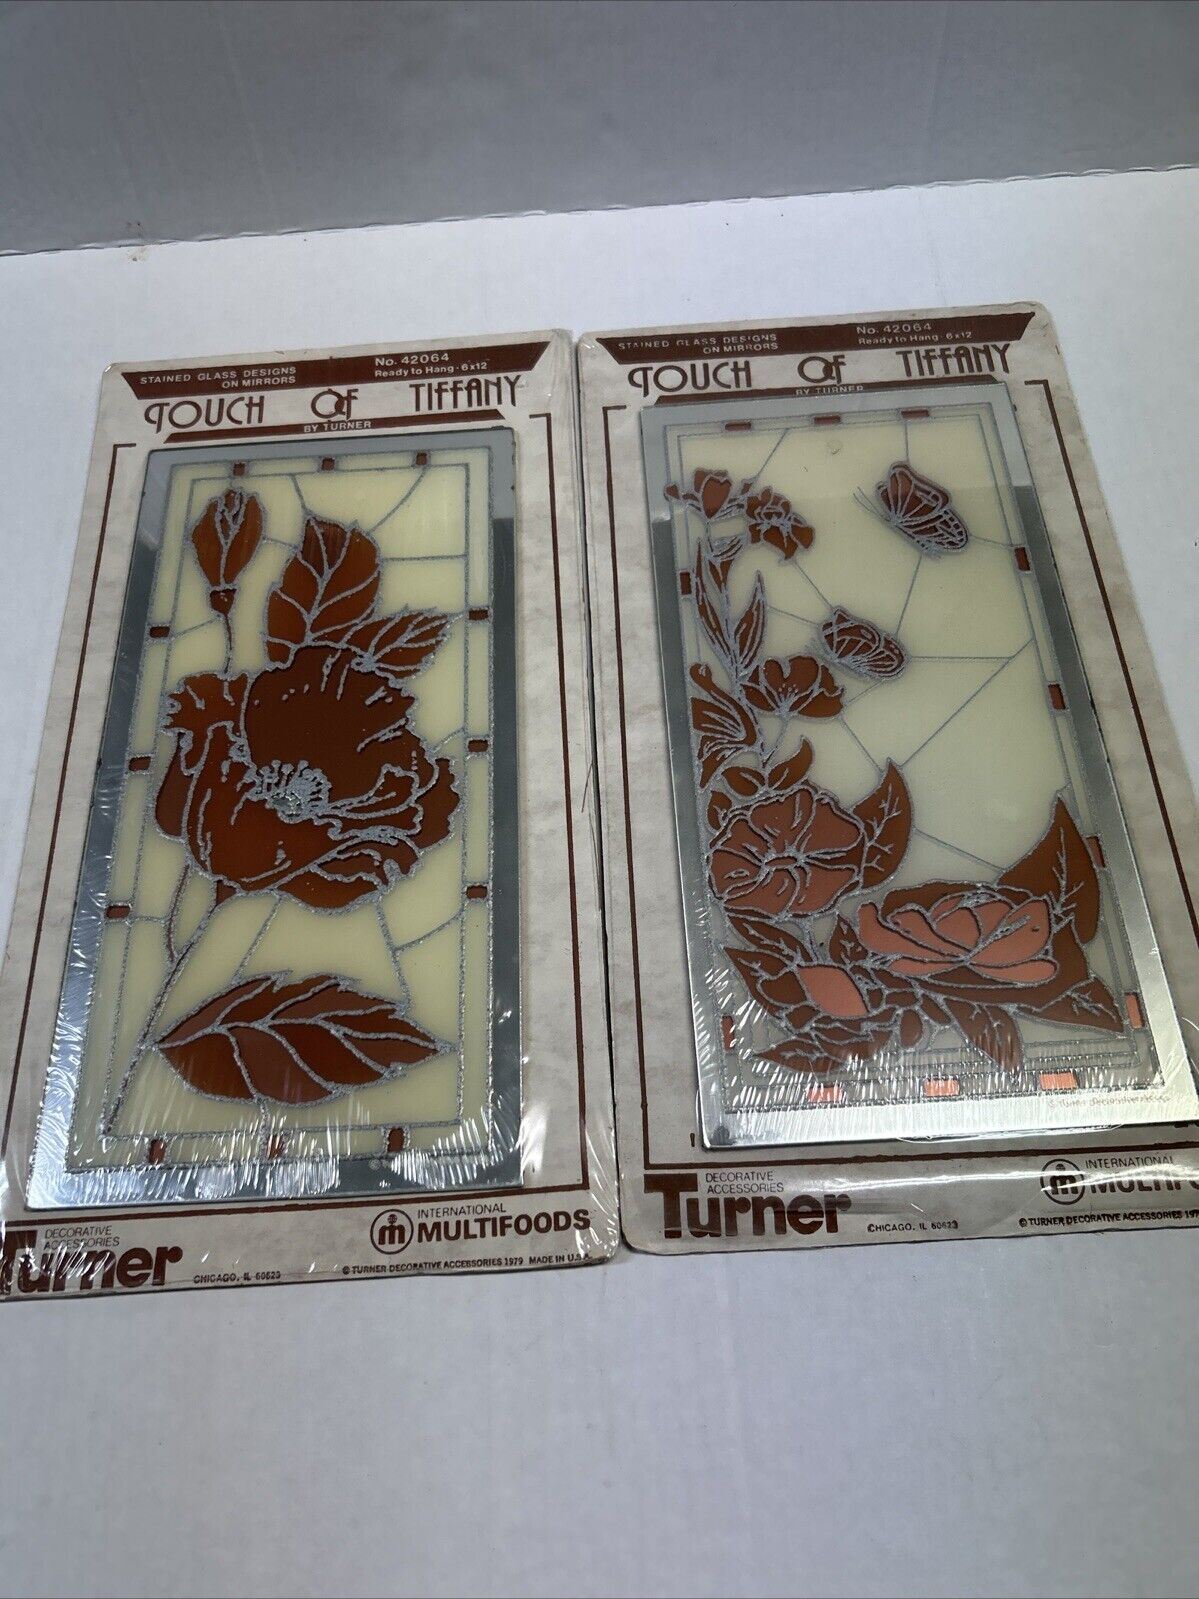 Set of 2 Vintage MCM Turner Decorative Stained Glass Panels - 12” x 6”